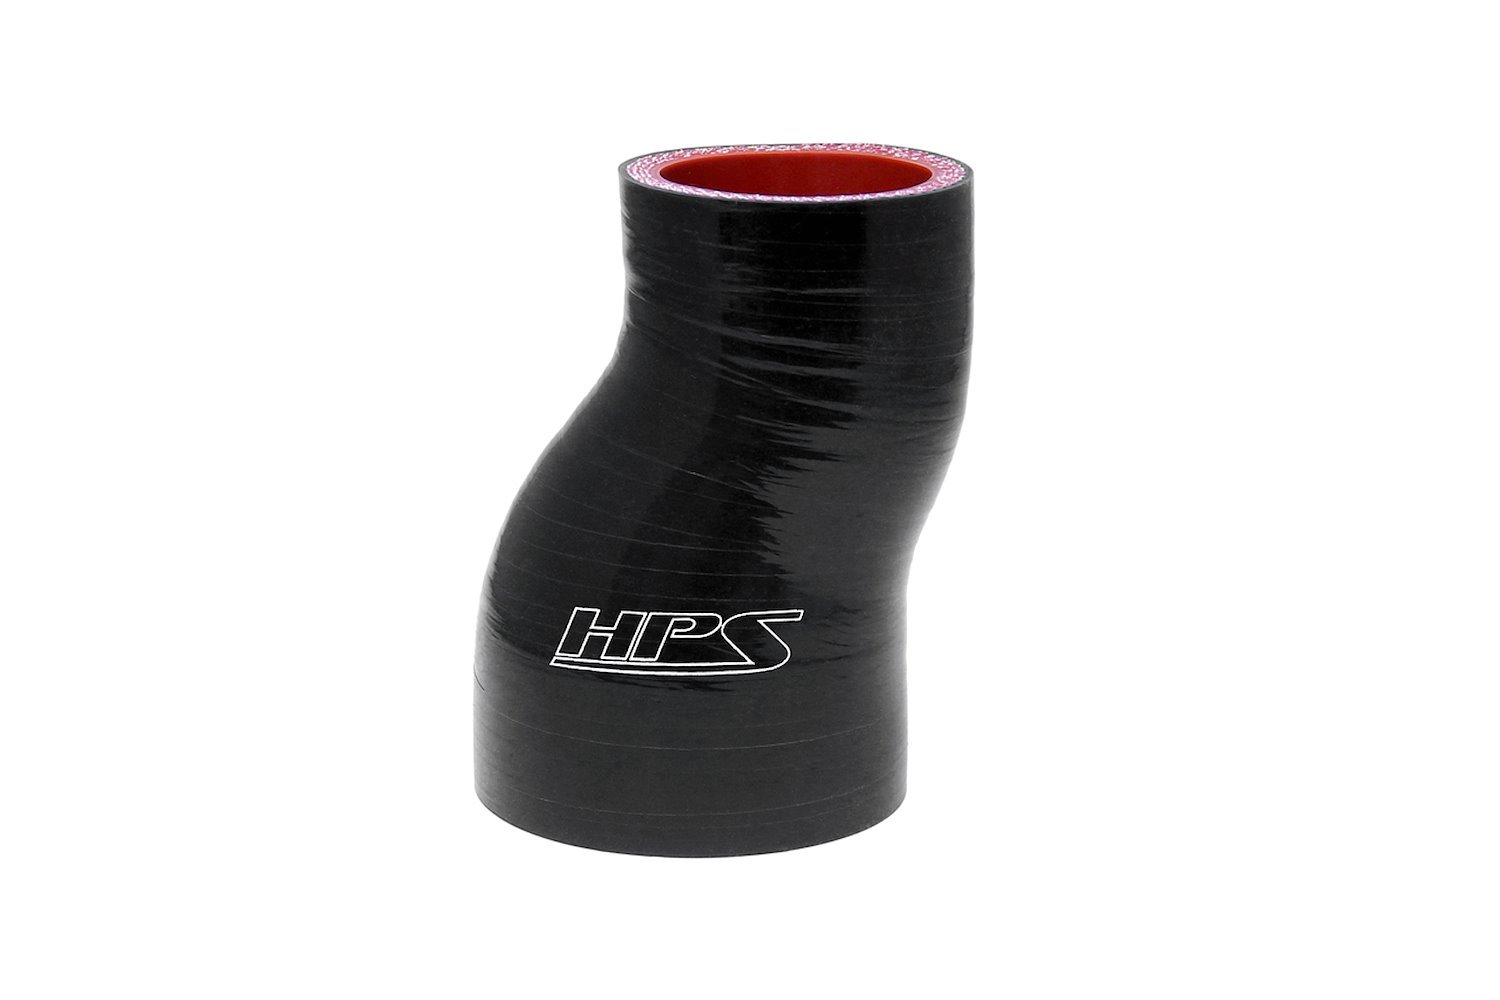 HTSOR-150-200-BLK Silicone Offset Reducer Hose, High-Temp Reinforced, 1-1/2 in. - 2 in. ID, 3 in. Long, Black